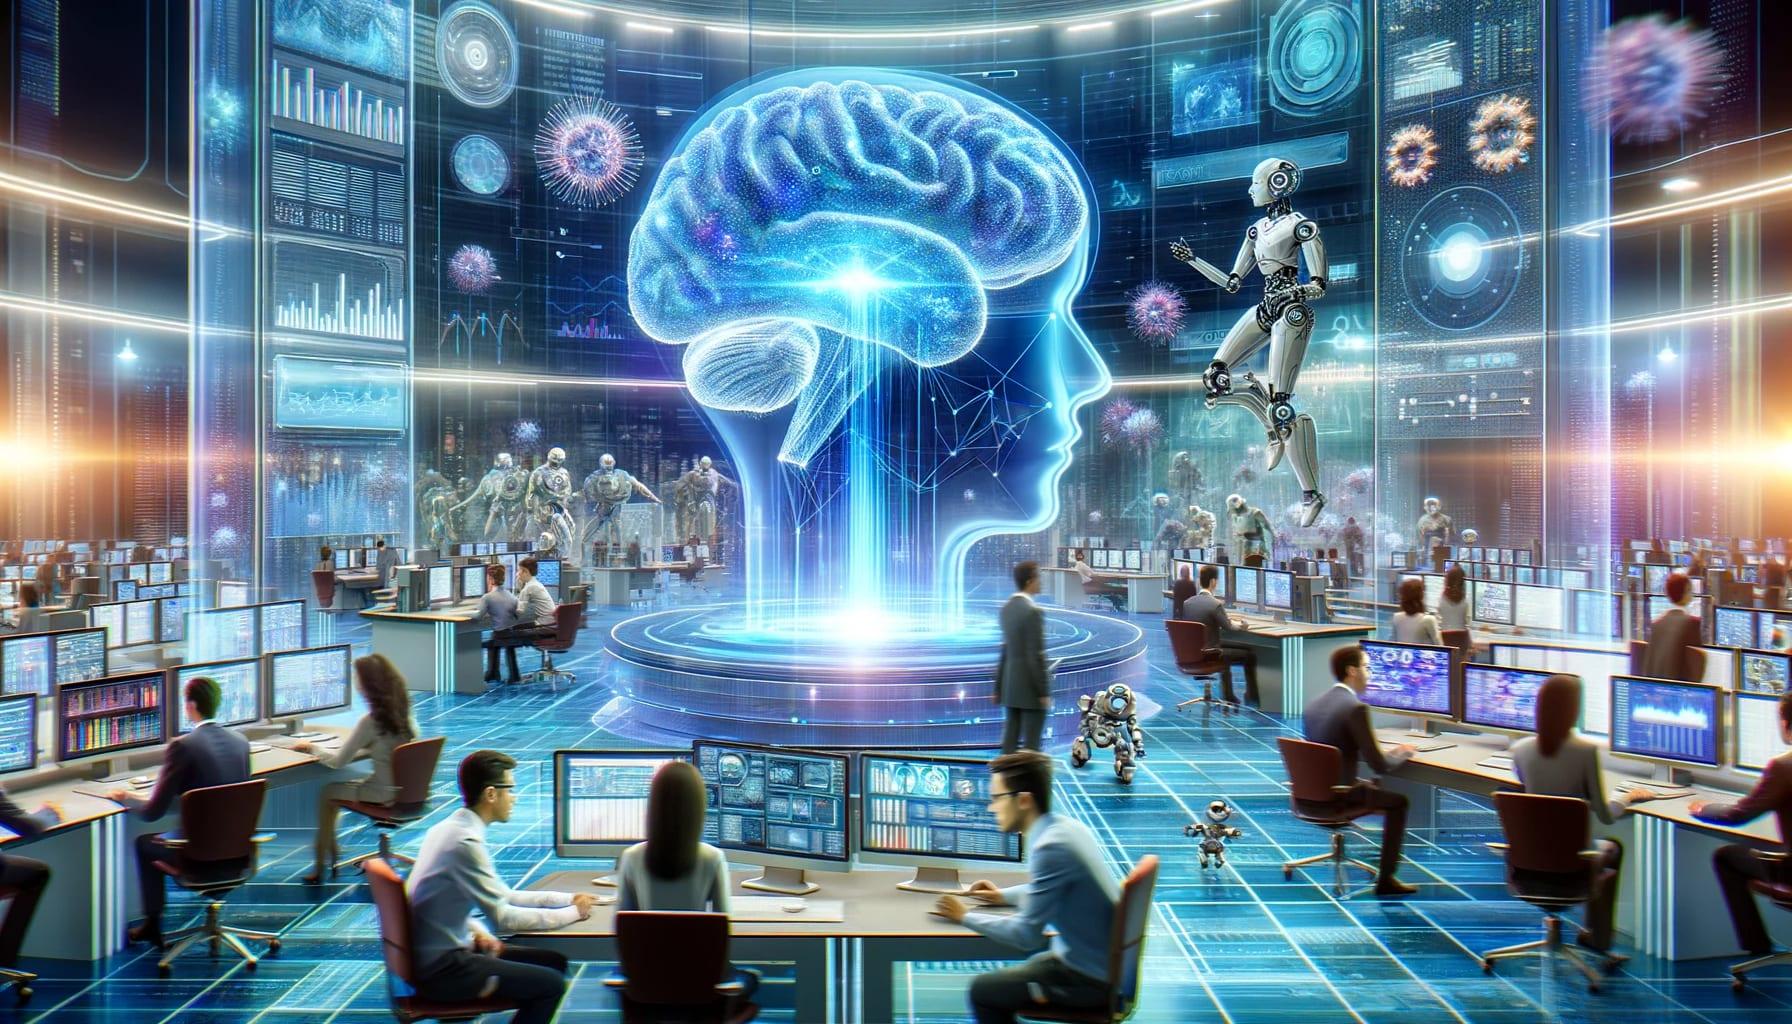 A futuristic newsroom brimming with activity, where journalists are clustered around holographic screens displaying real-time analytics and AI-generated content. In the background, a large, transparent AI brain pulses with light, symbolizing the heart of operations, with digital streams of data flowing seamlessly from the brain to the journalists' screens